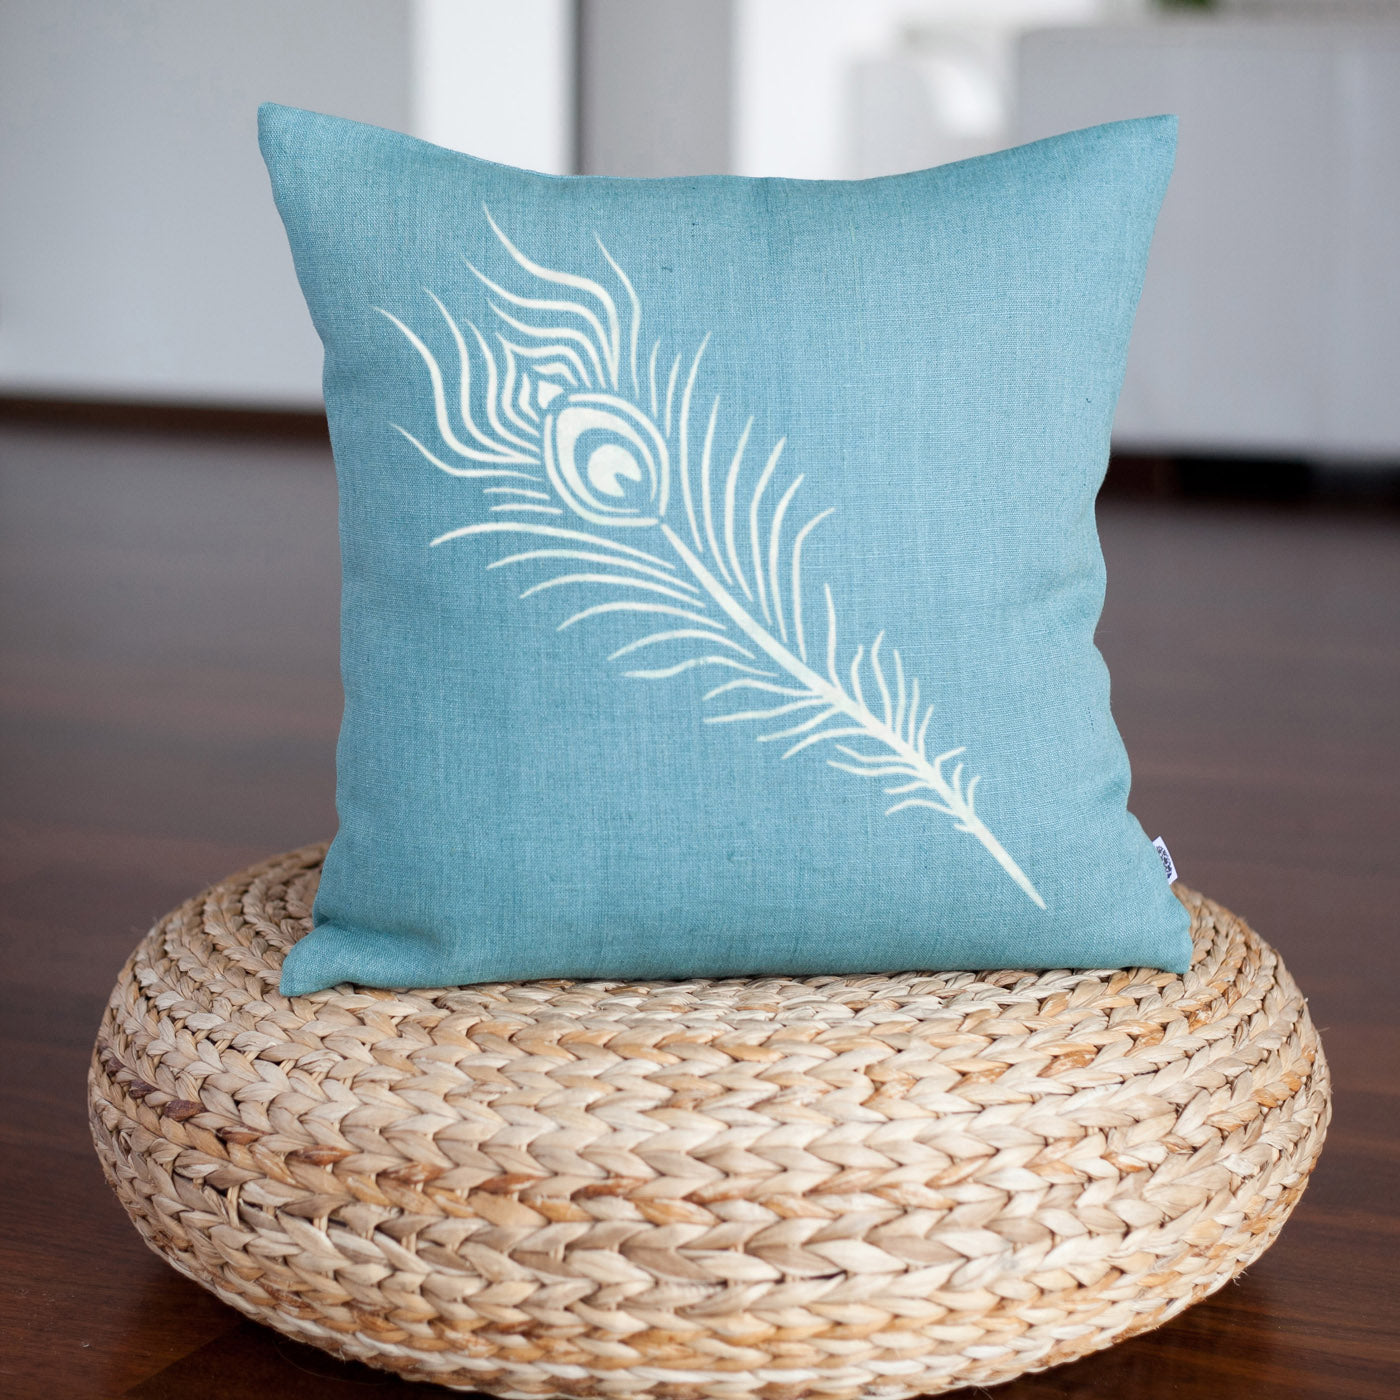 CraftStar Peacock Feather Stencilled onto Cushion